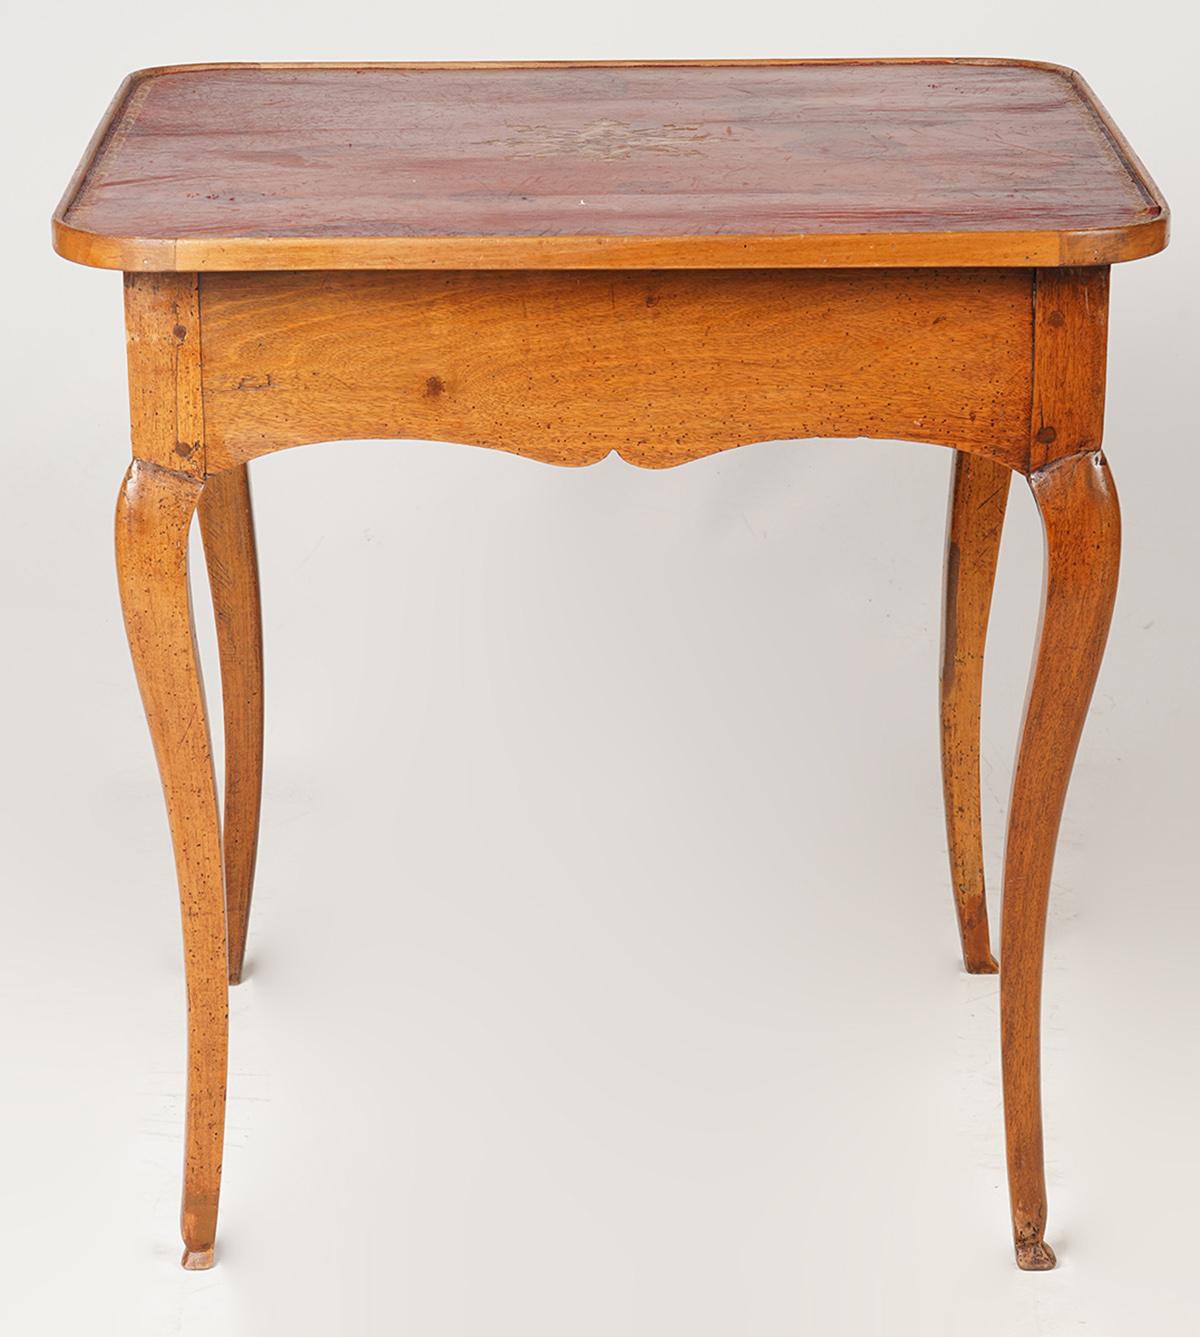 Italian Provincial 18th Century Oakwood Side Table with Leather Lined Top 4